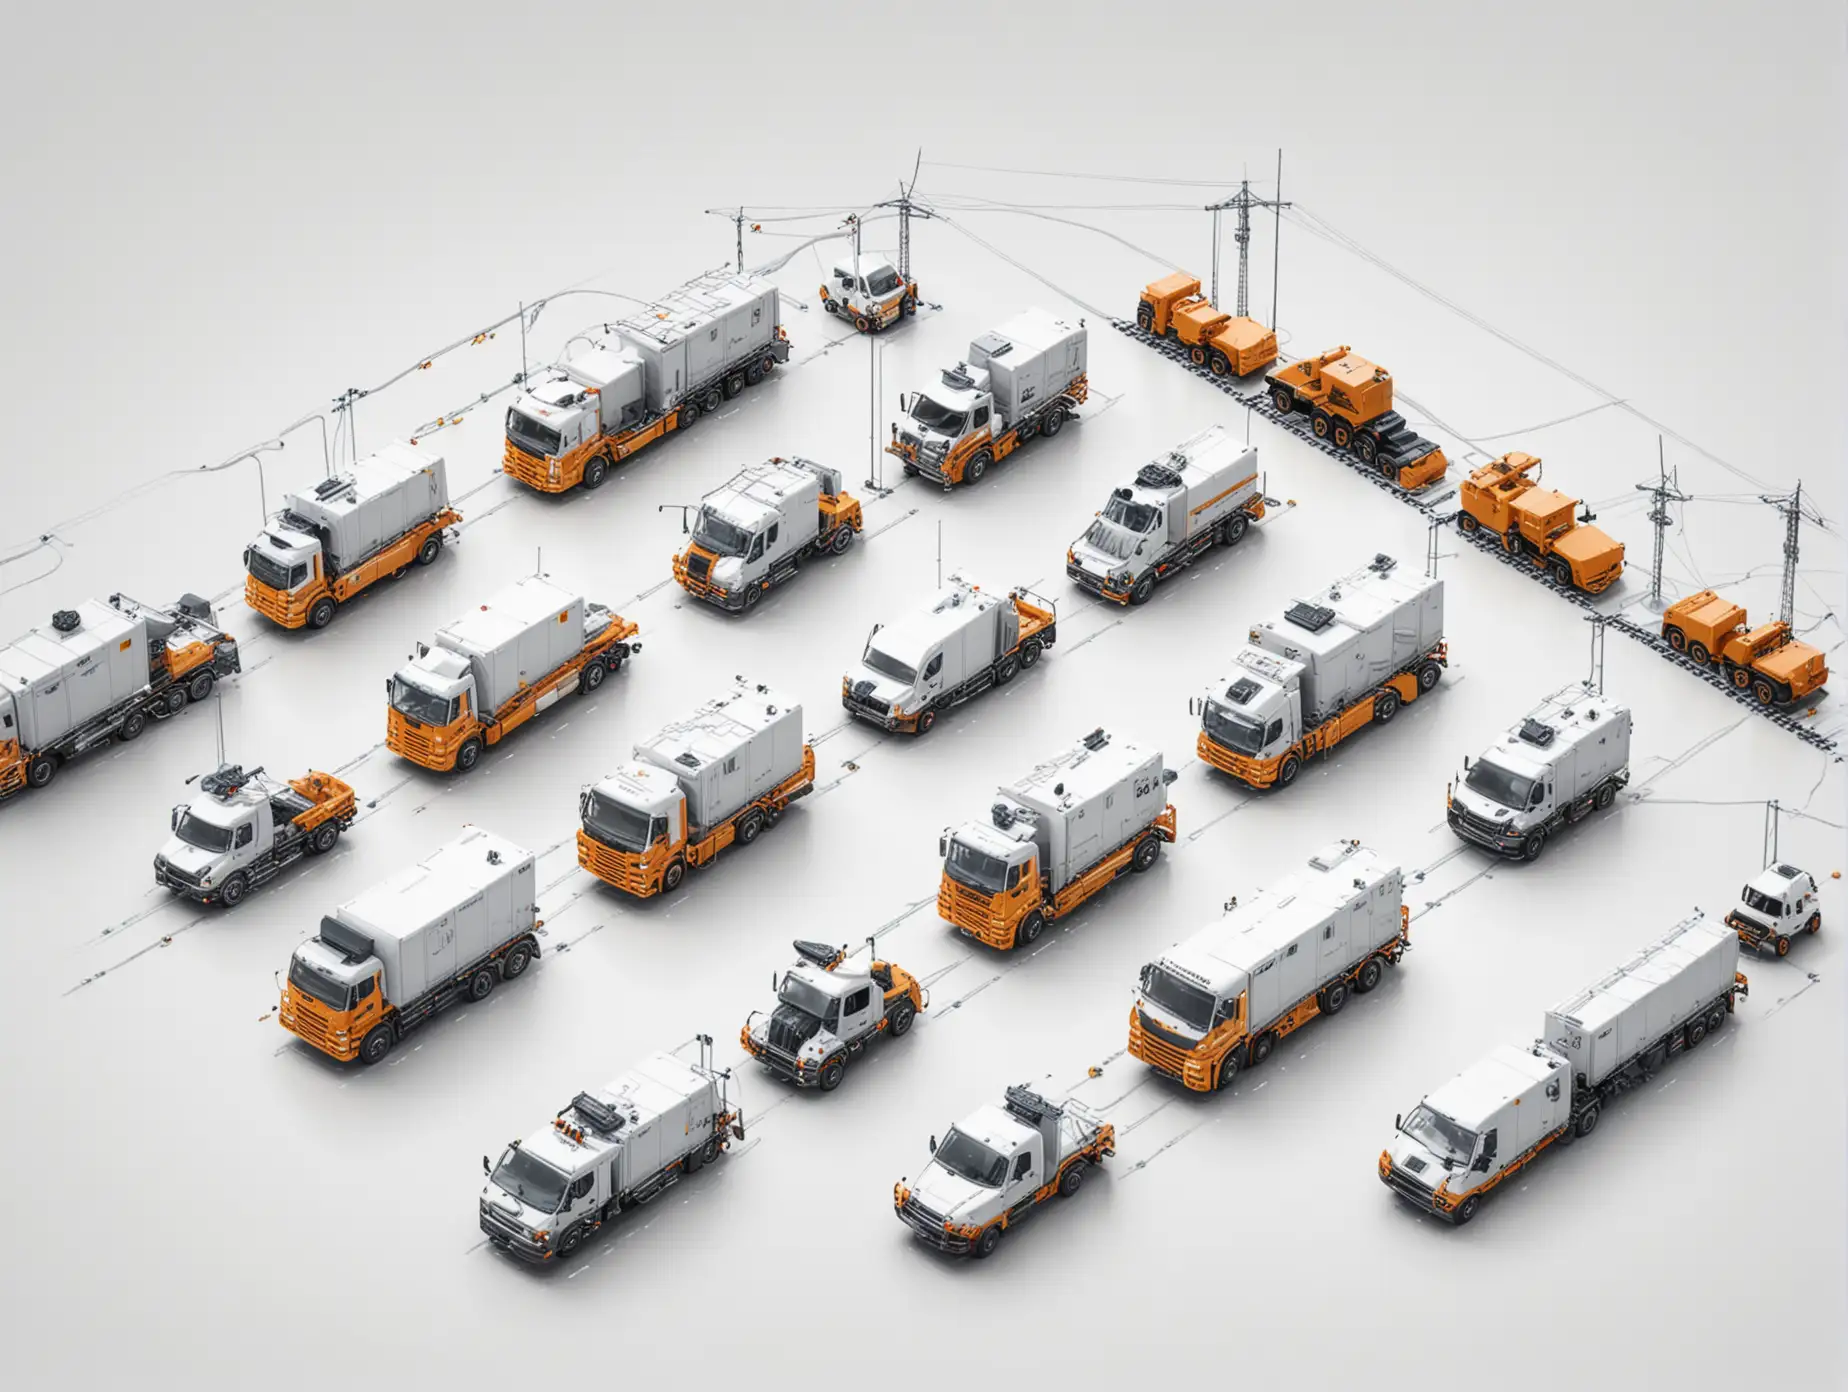 Industrial Vehicle Fleet on a Connected Electrical Grid